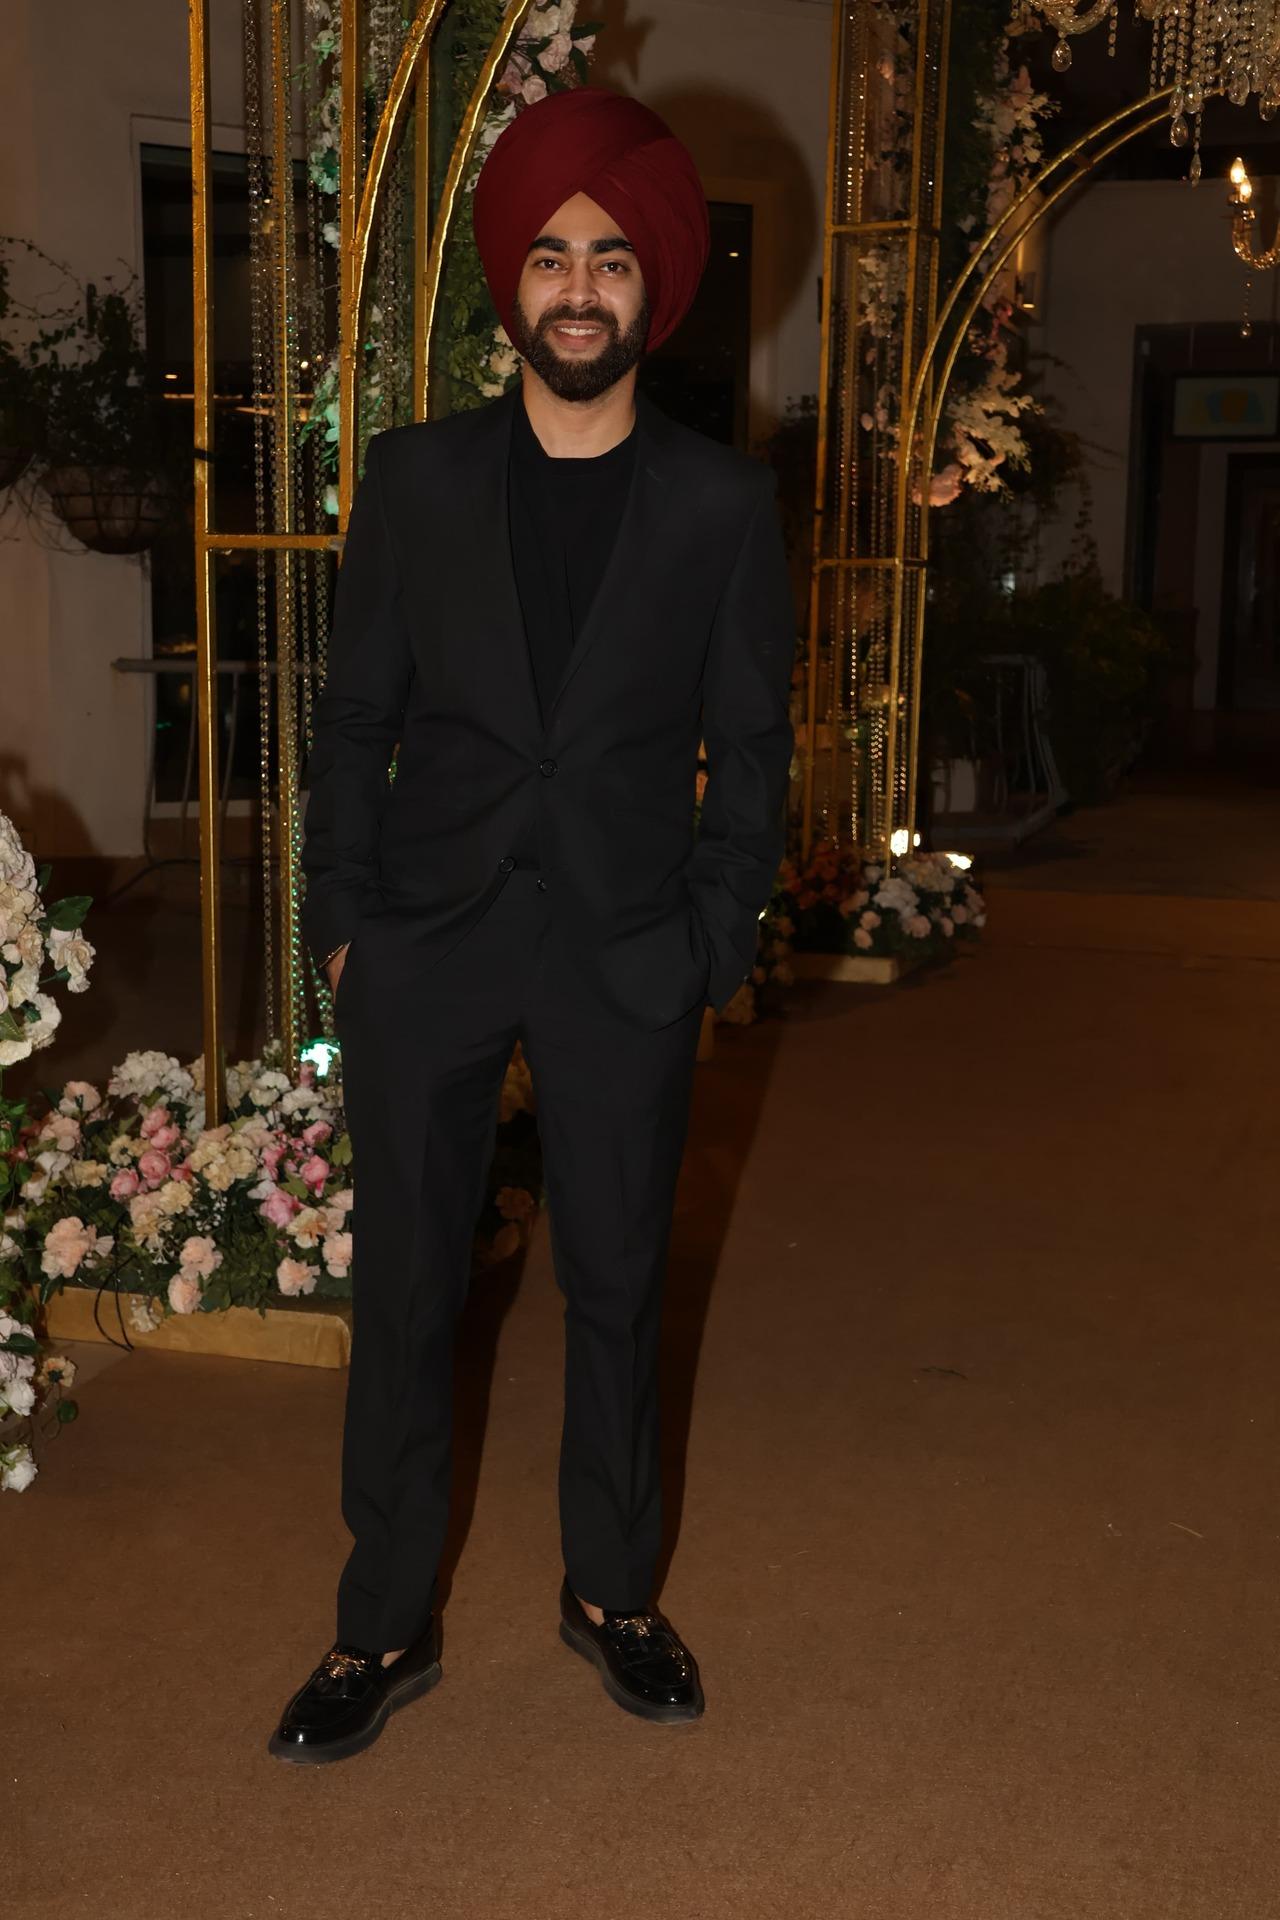 Manjot Singh was also snapped at the party, pairing a black three-piece suit. The actor's red pagg stole our hearts